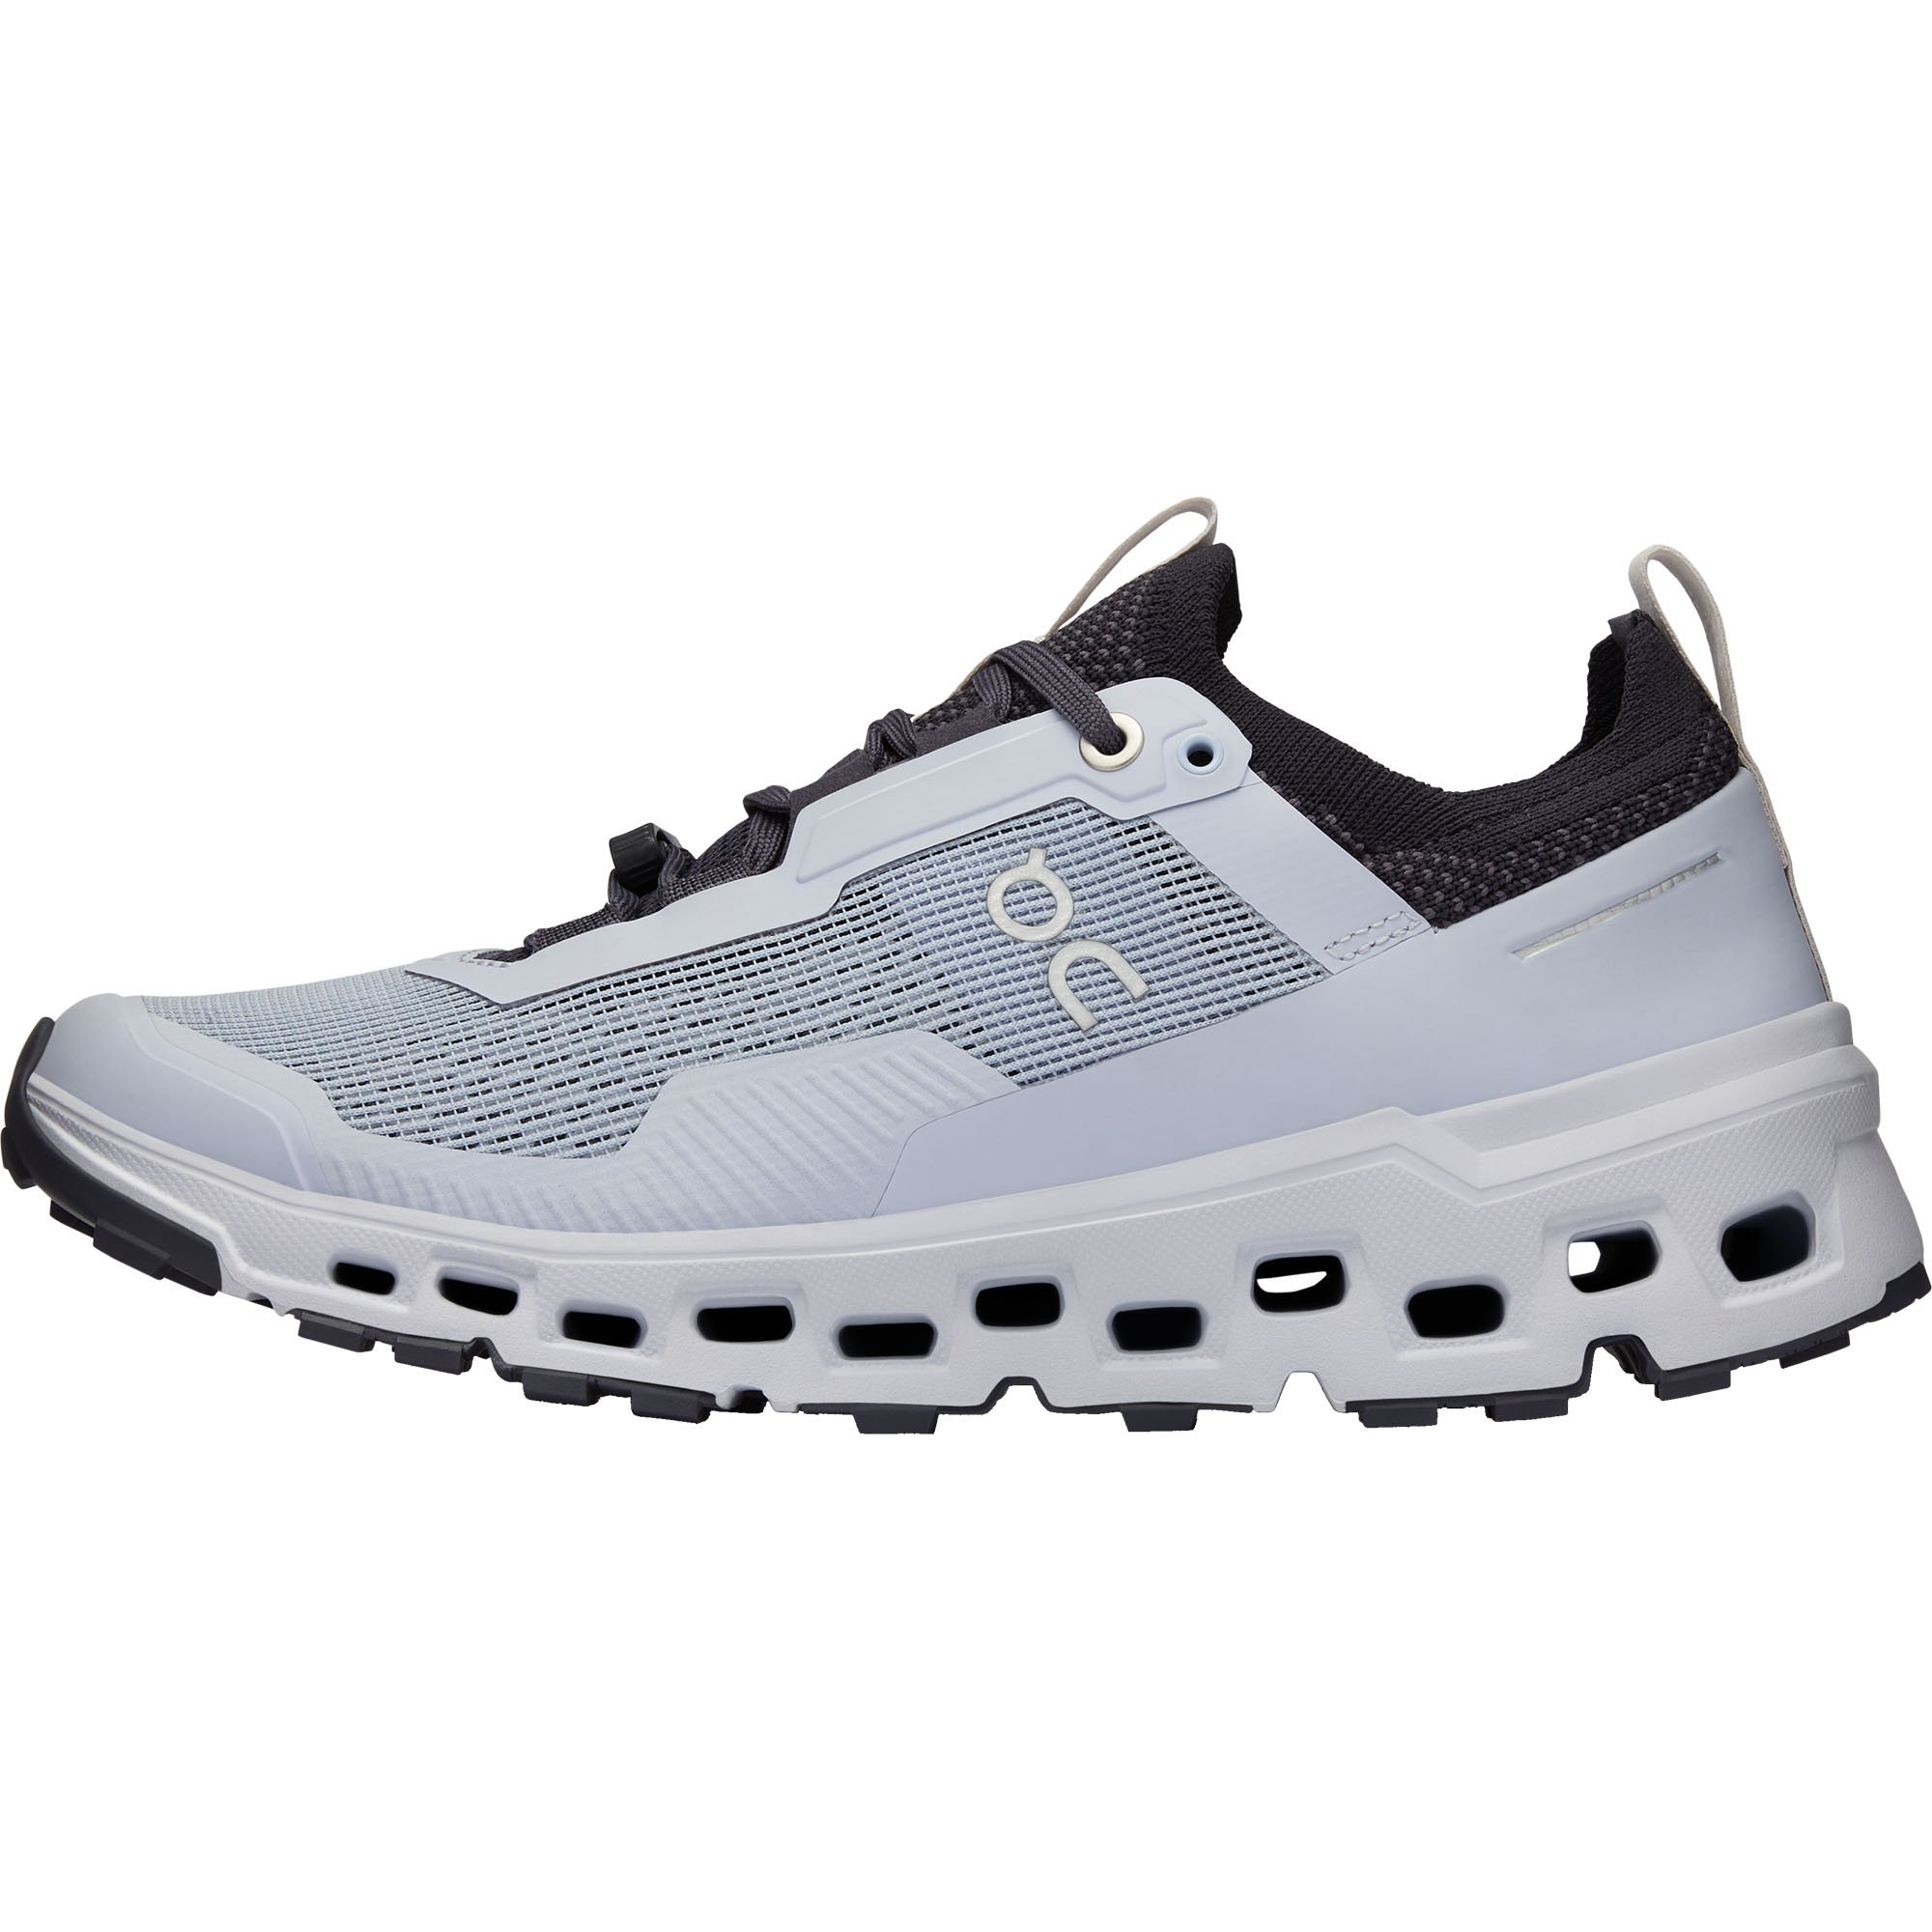 On Cloudultra 2 Women's Trail Running Shoes